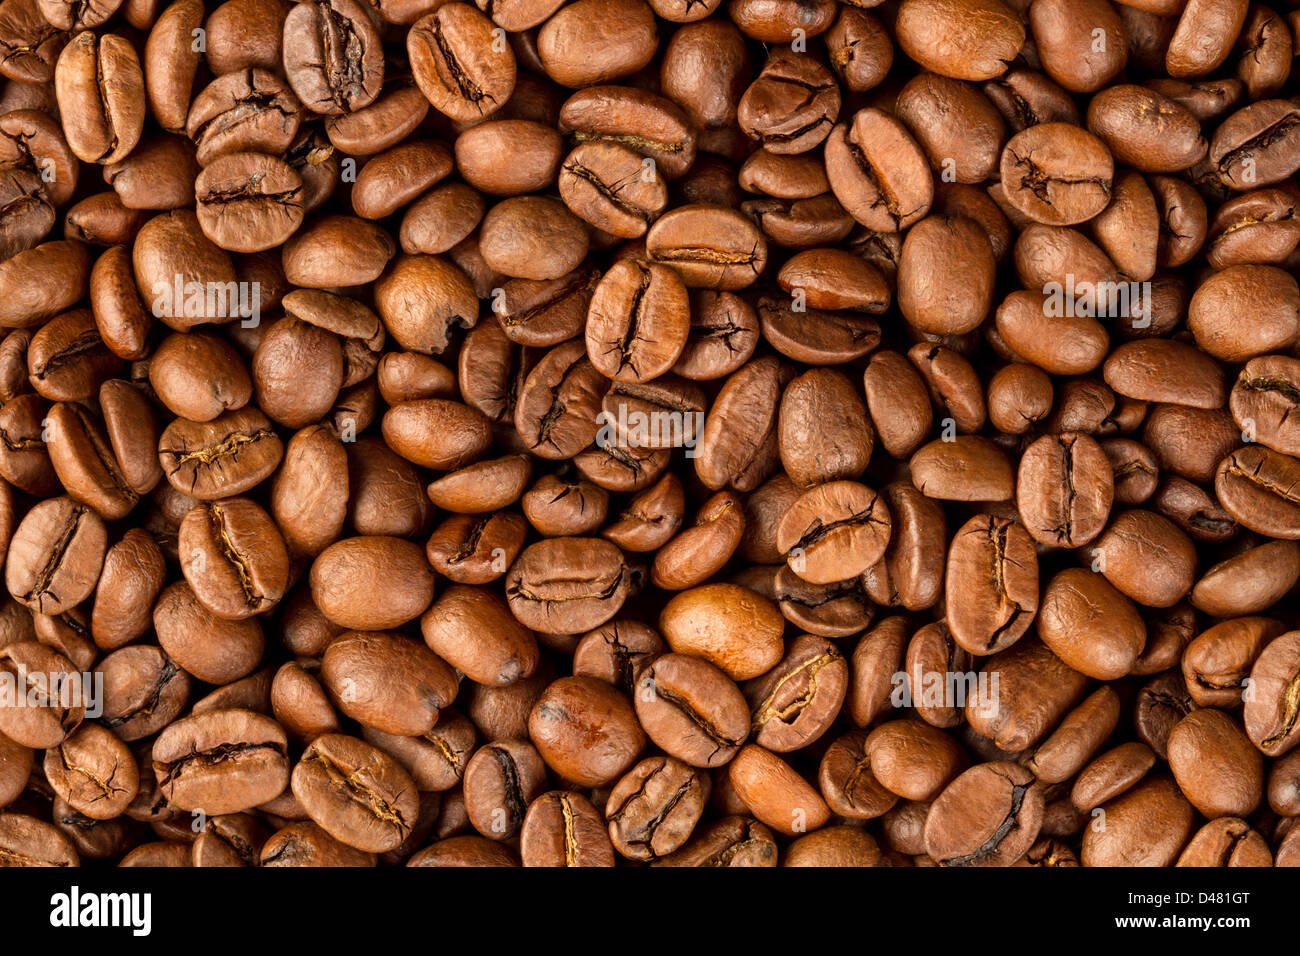 close-up shot of coffee beans Stock Photo